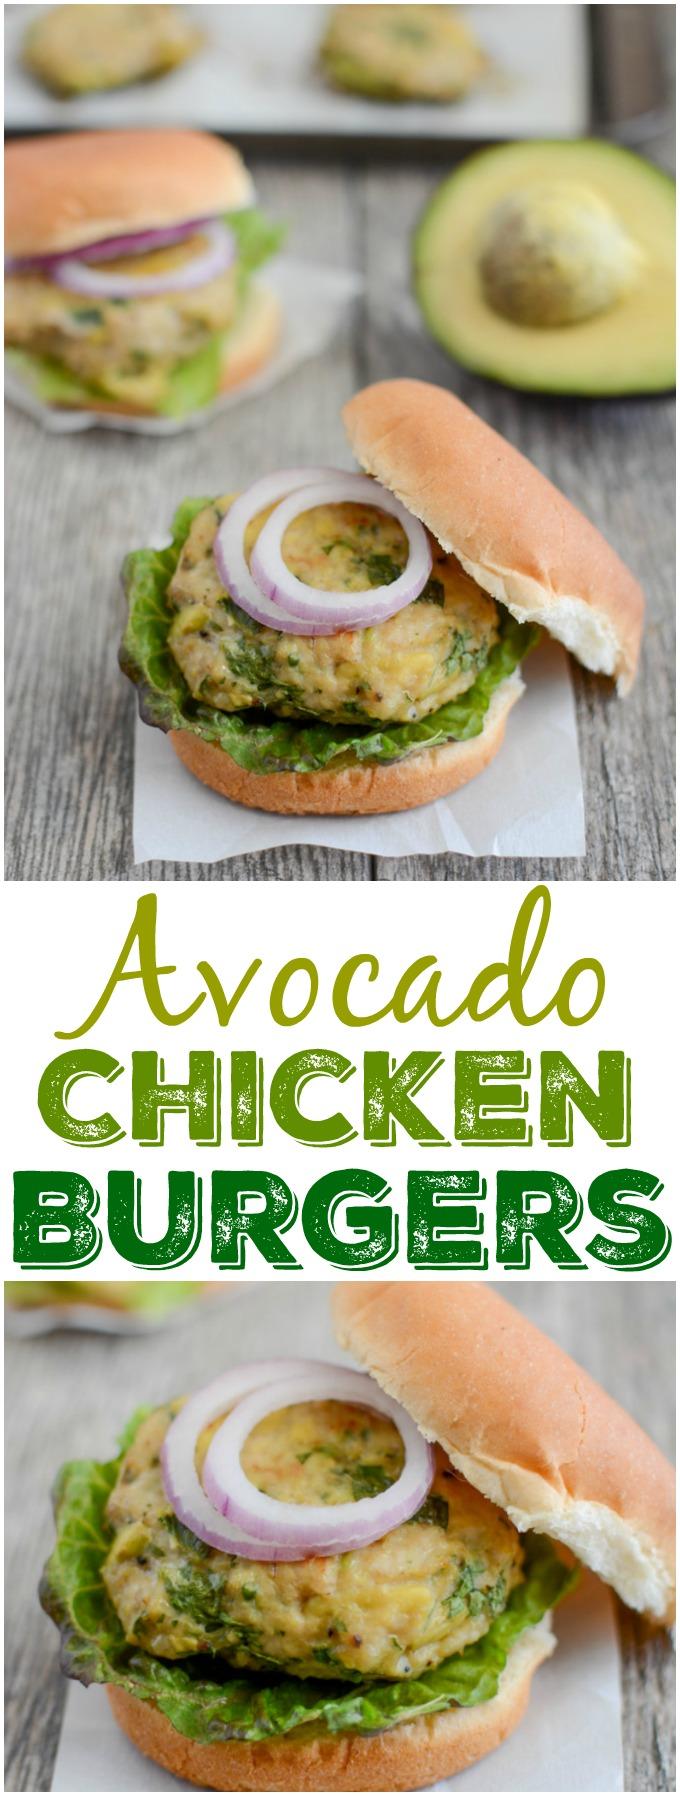 These Avocado Chicken Burgers are an easy weeknight dinner in the oven or on the grill. This recipe is gluten-free, paleo and can easily be made ahead of time during food prep. 